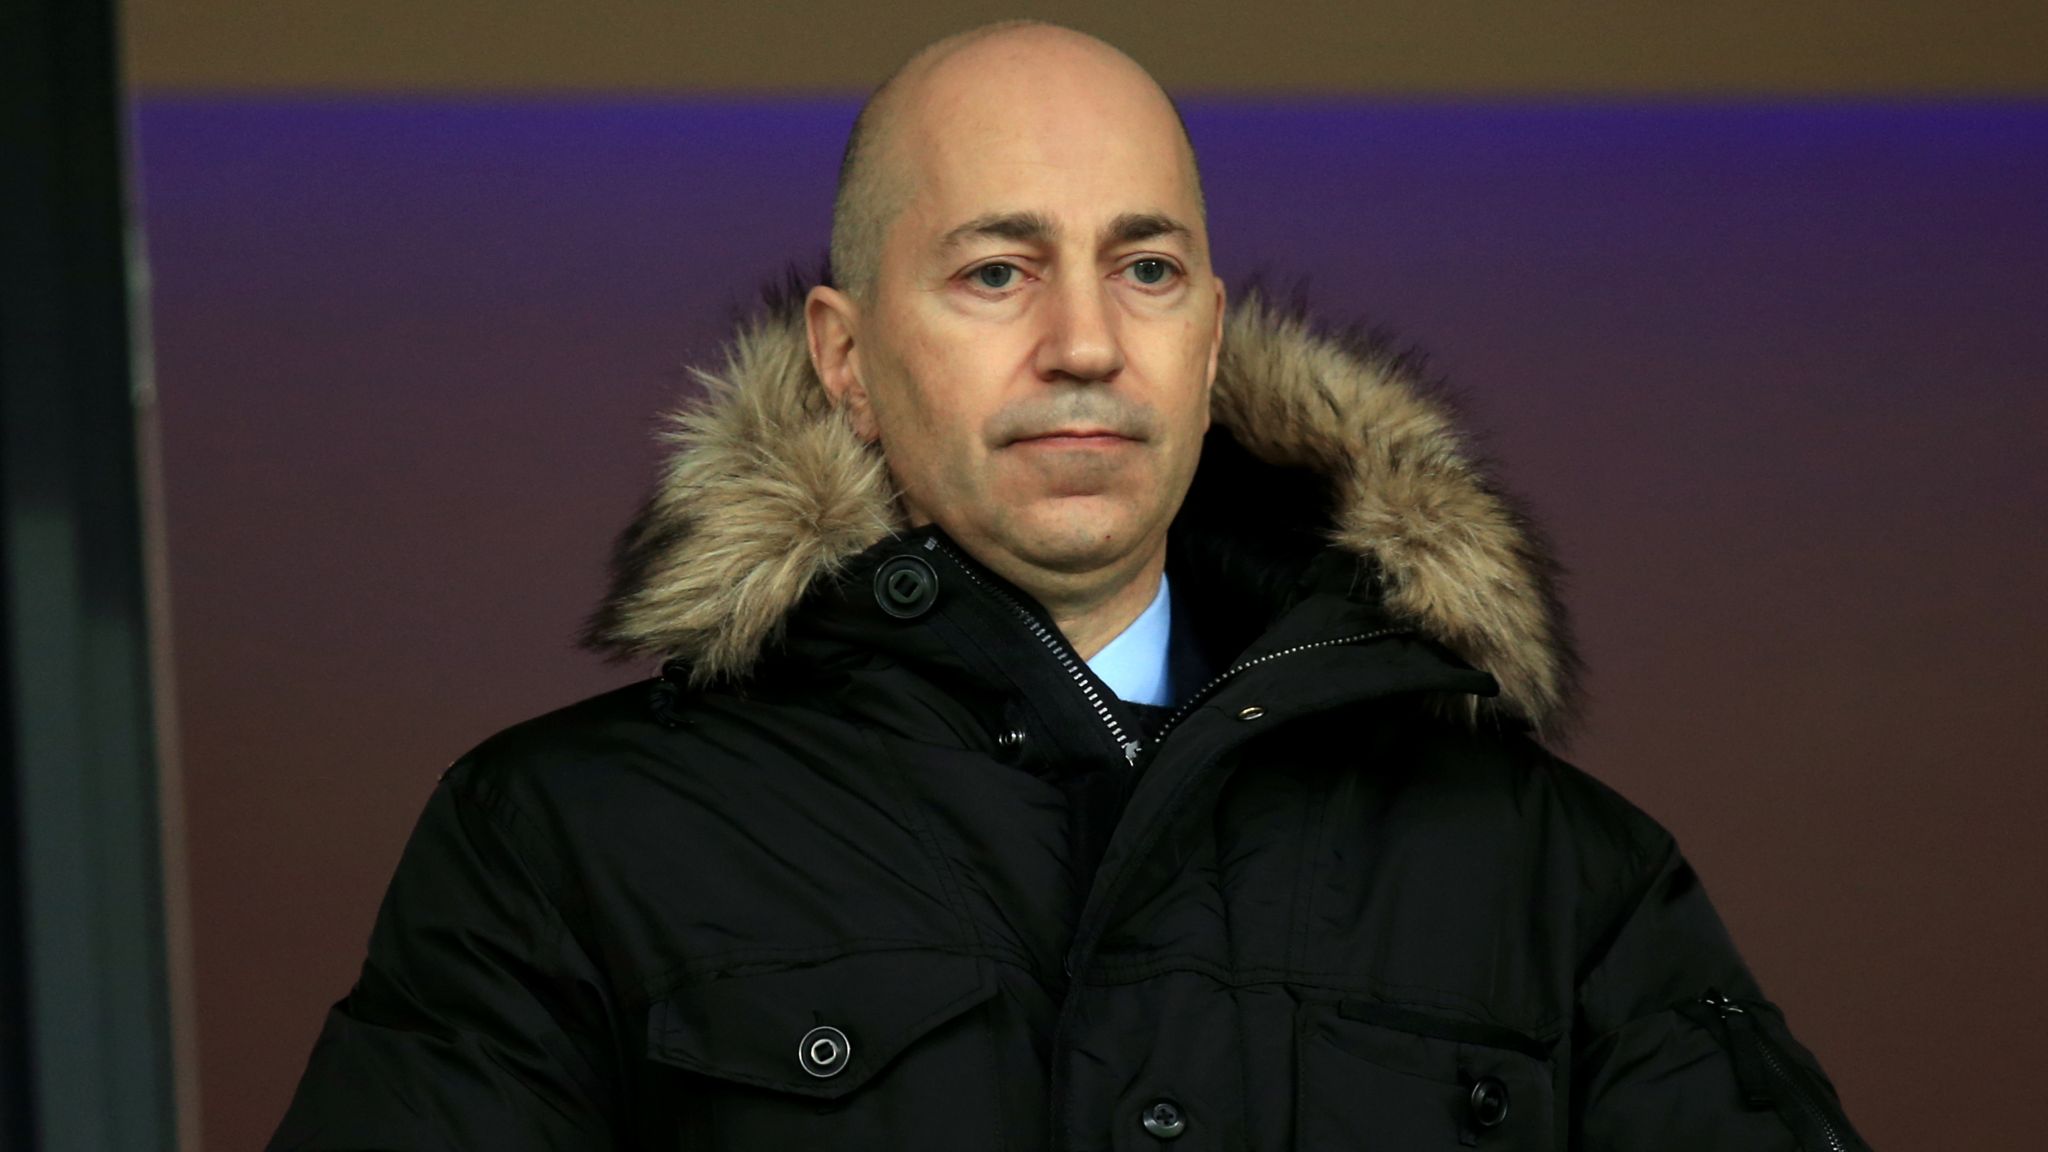 Ivan Gazidis' quest for power at AC Milan could send 17-year-old Brazilian  to Arsenal